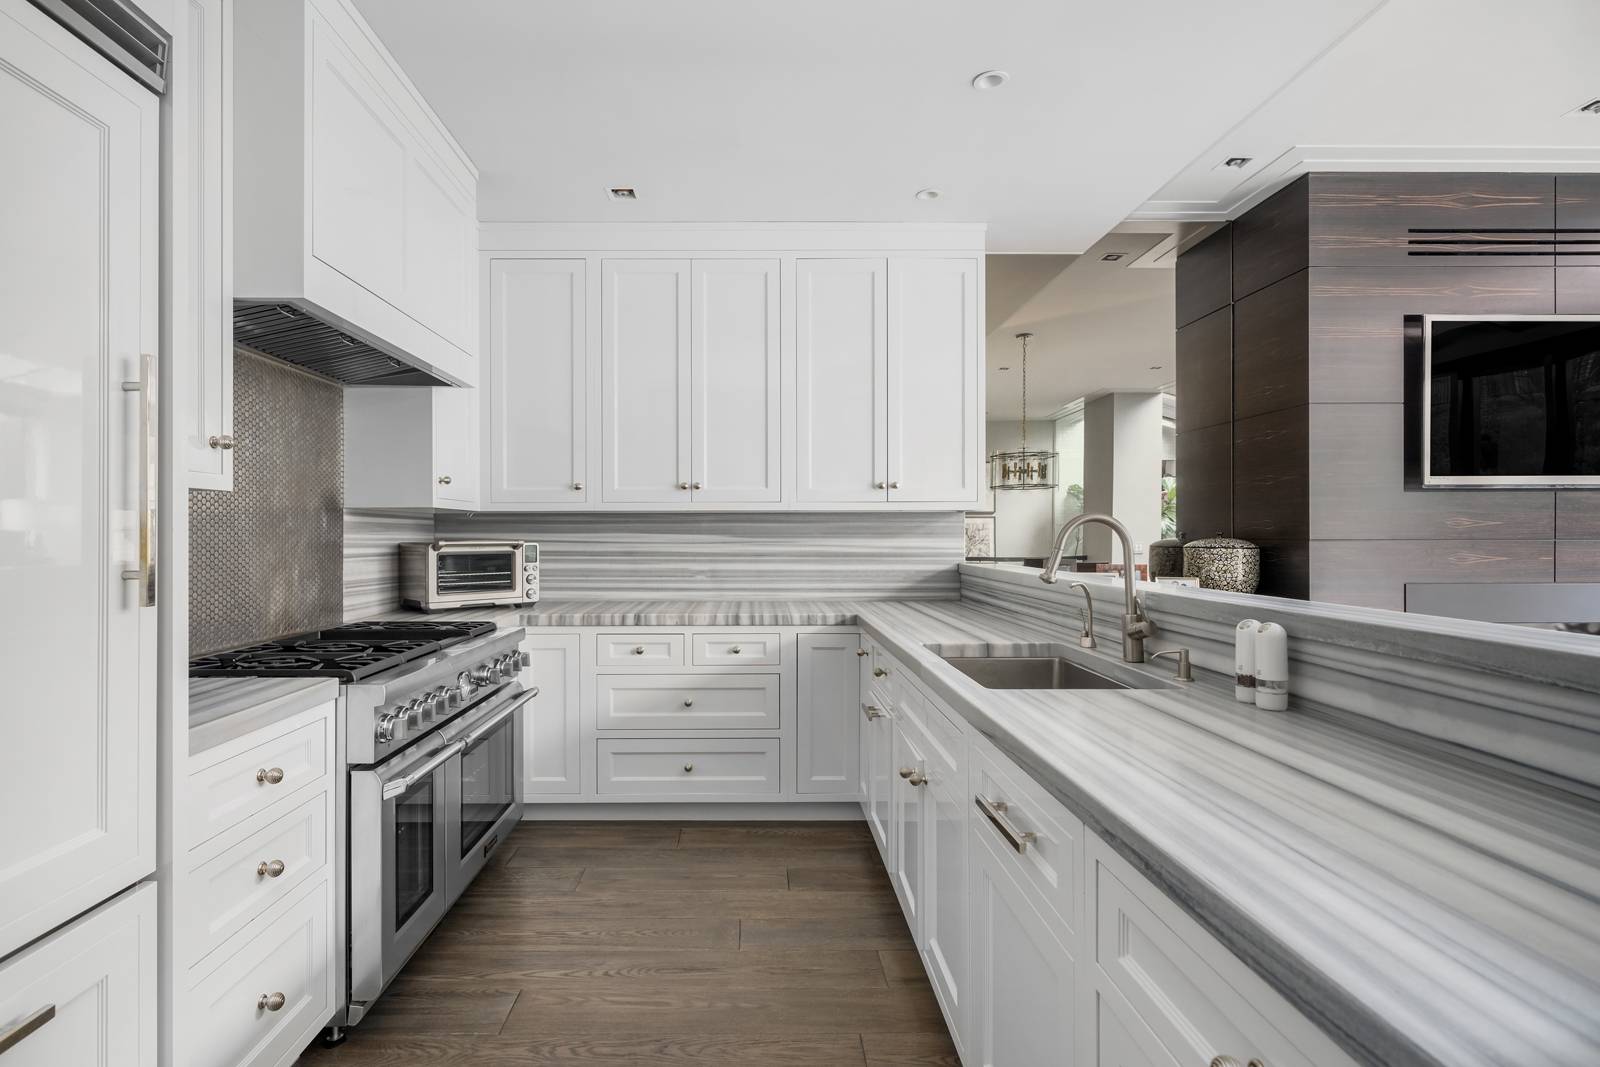 Townhouse 4 at 385 West 12th offers the best of both worlds in one property enjoy the privacy of your own West Village Townhouse within a boutique full service condominium ...